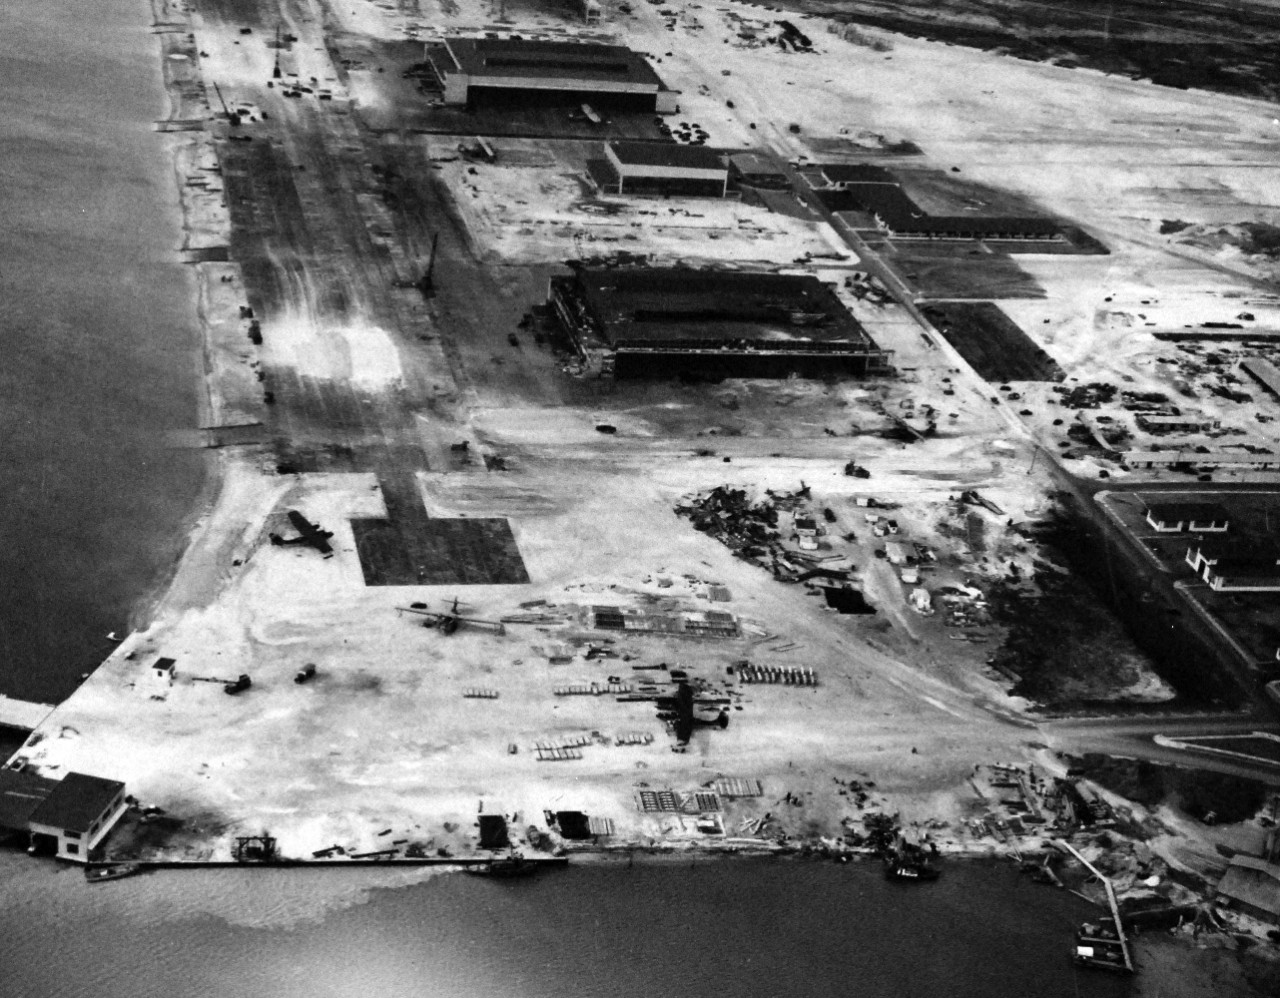 80-G-32867:   Japanese Attack on Pearl Harbor, December 7, 1941.   Hangar area at Naval Air Station, Kaneohe Bay showing damage wrought by the Japanese bombing.  The view looks west at an altitude of 500’.  Official U.S. Navy photograph, now in the collections of the National Archives.  (9//9/2015).